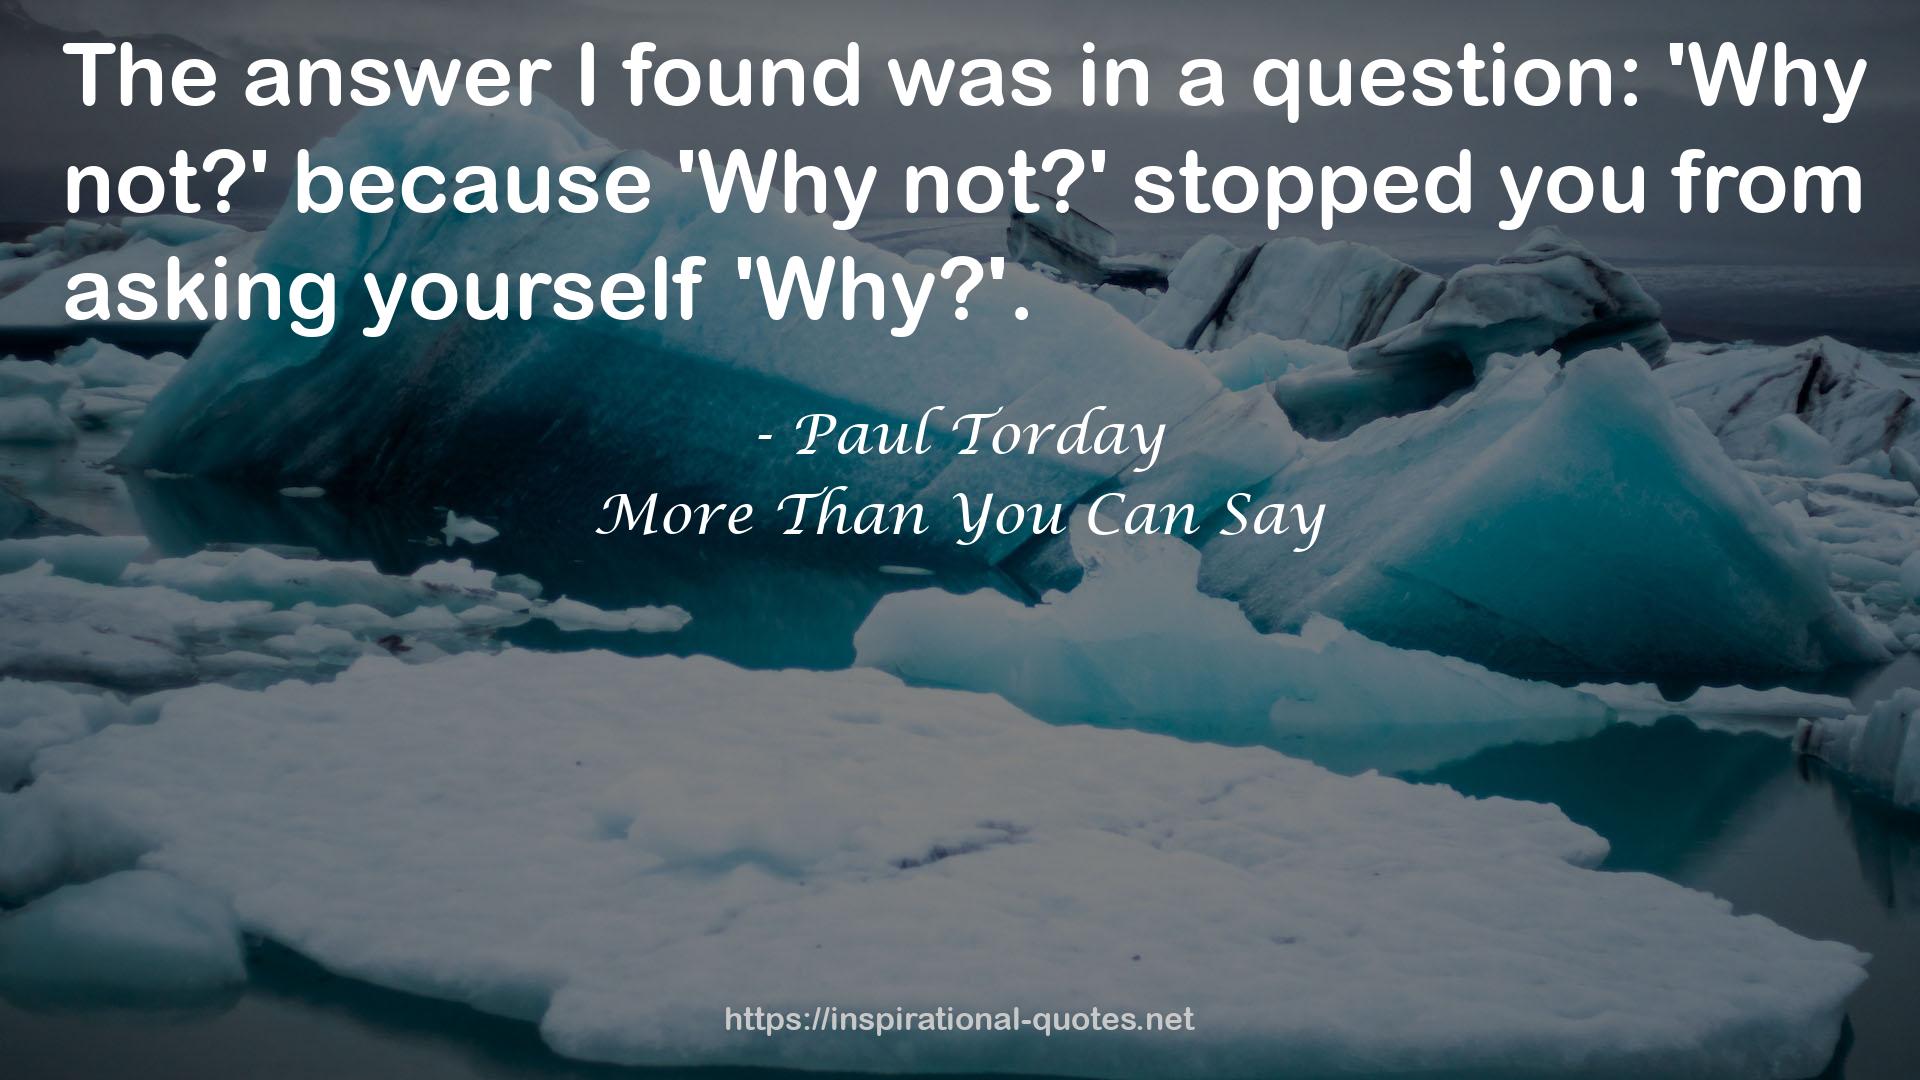 Paul Torday QUOTES